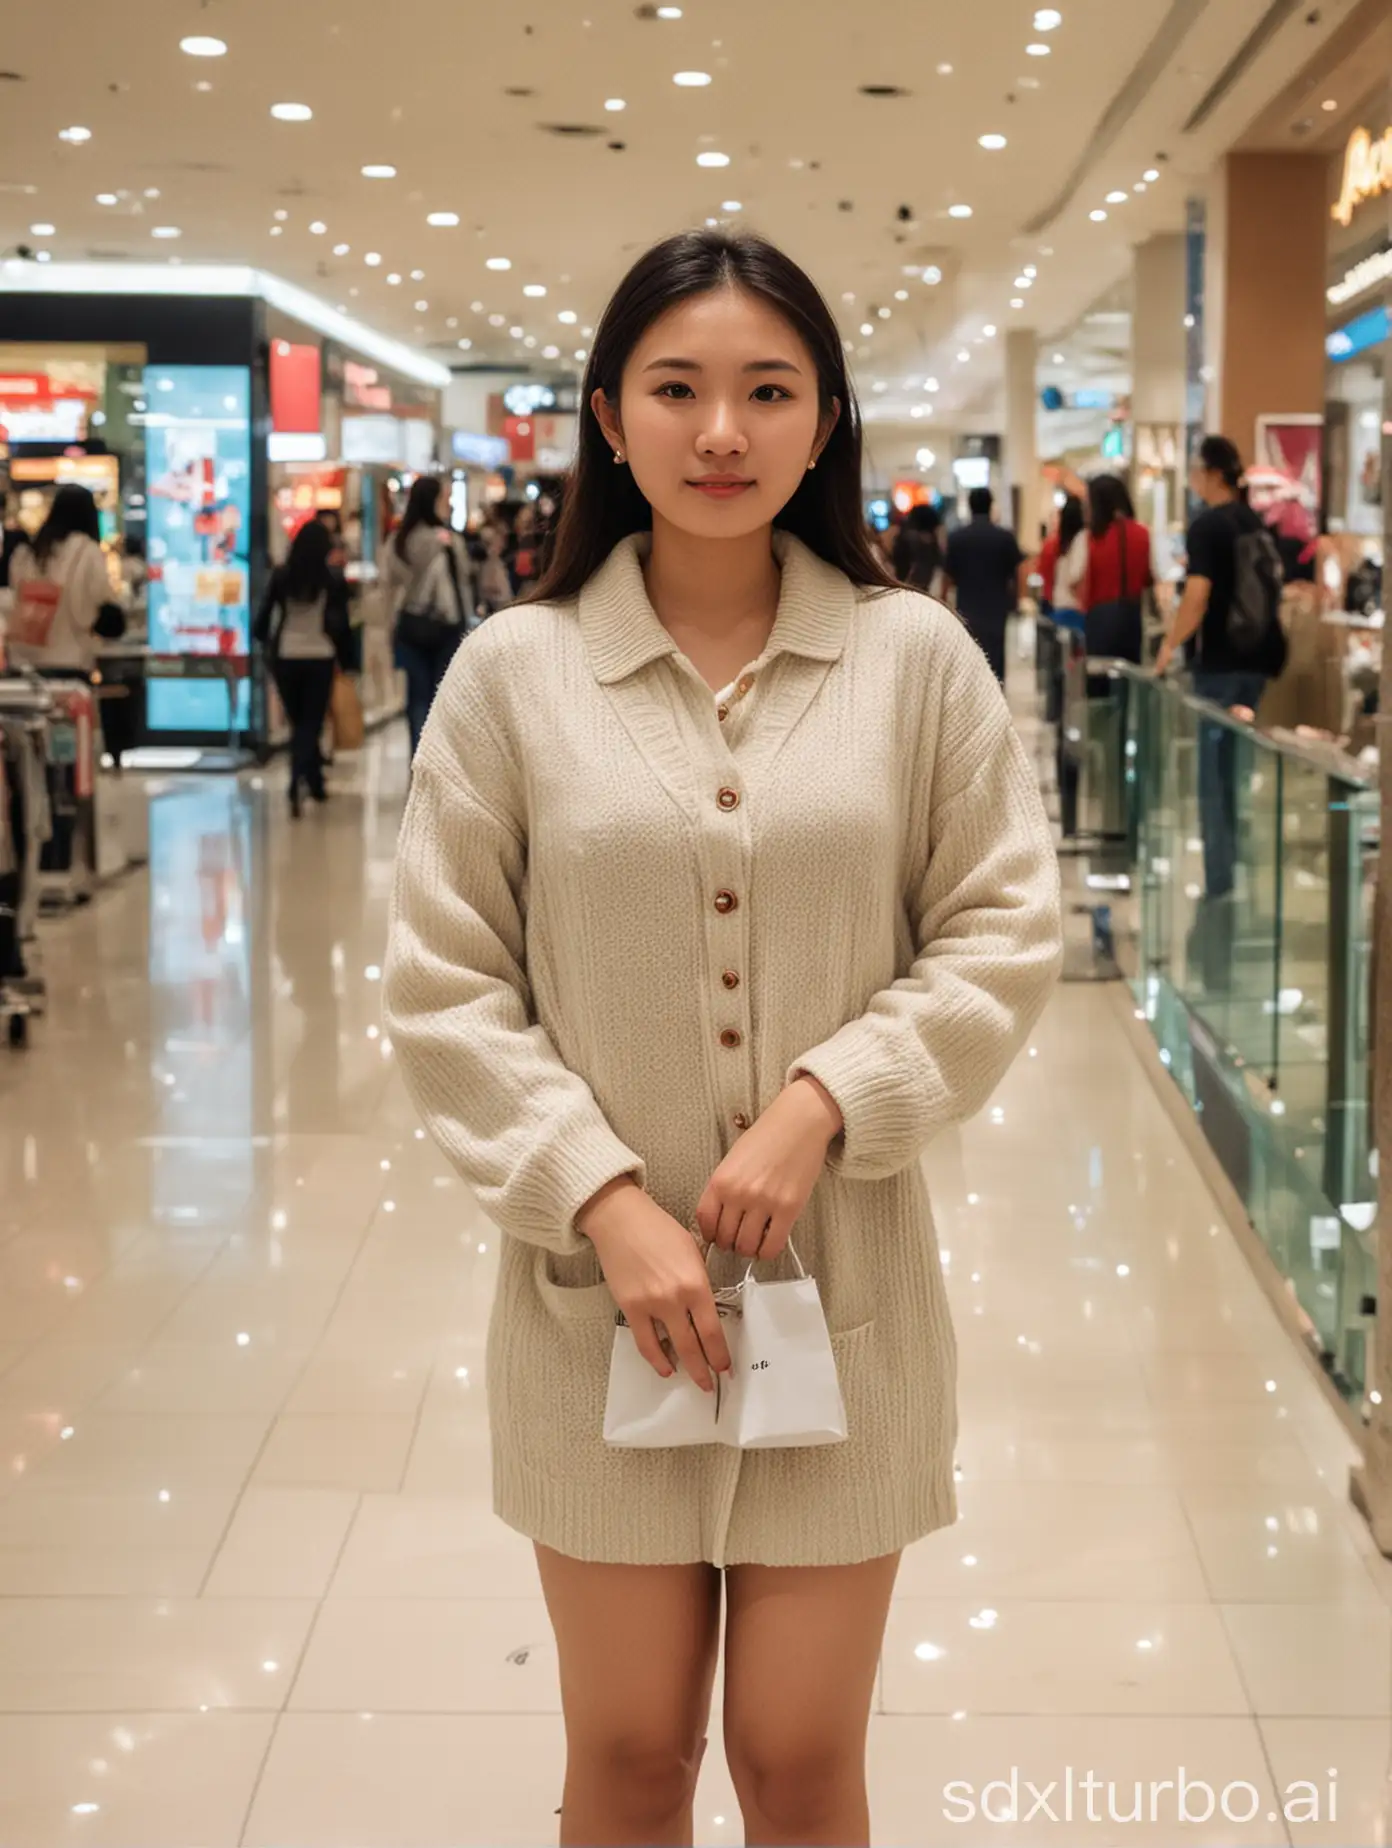 25-year-old lady, Asian, in the mall